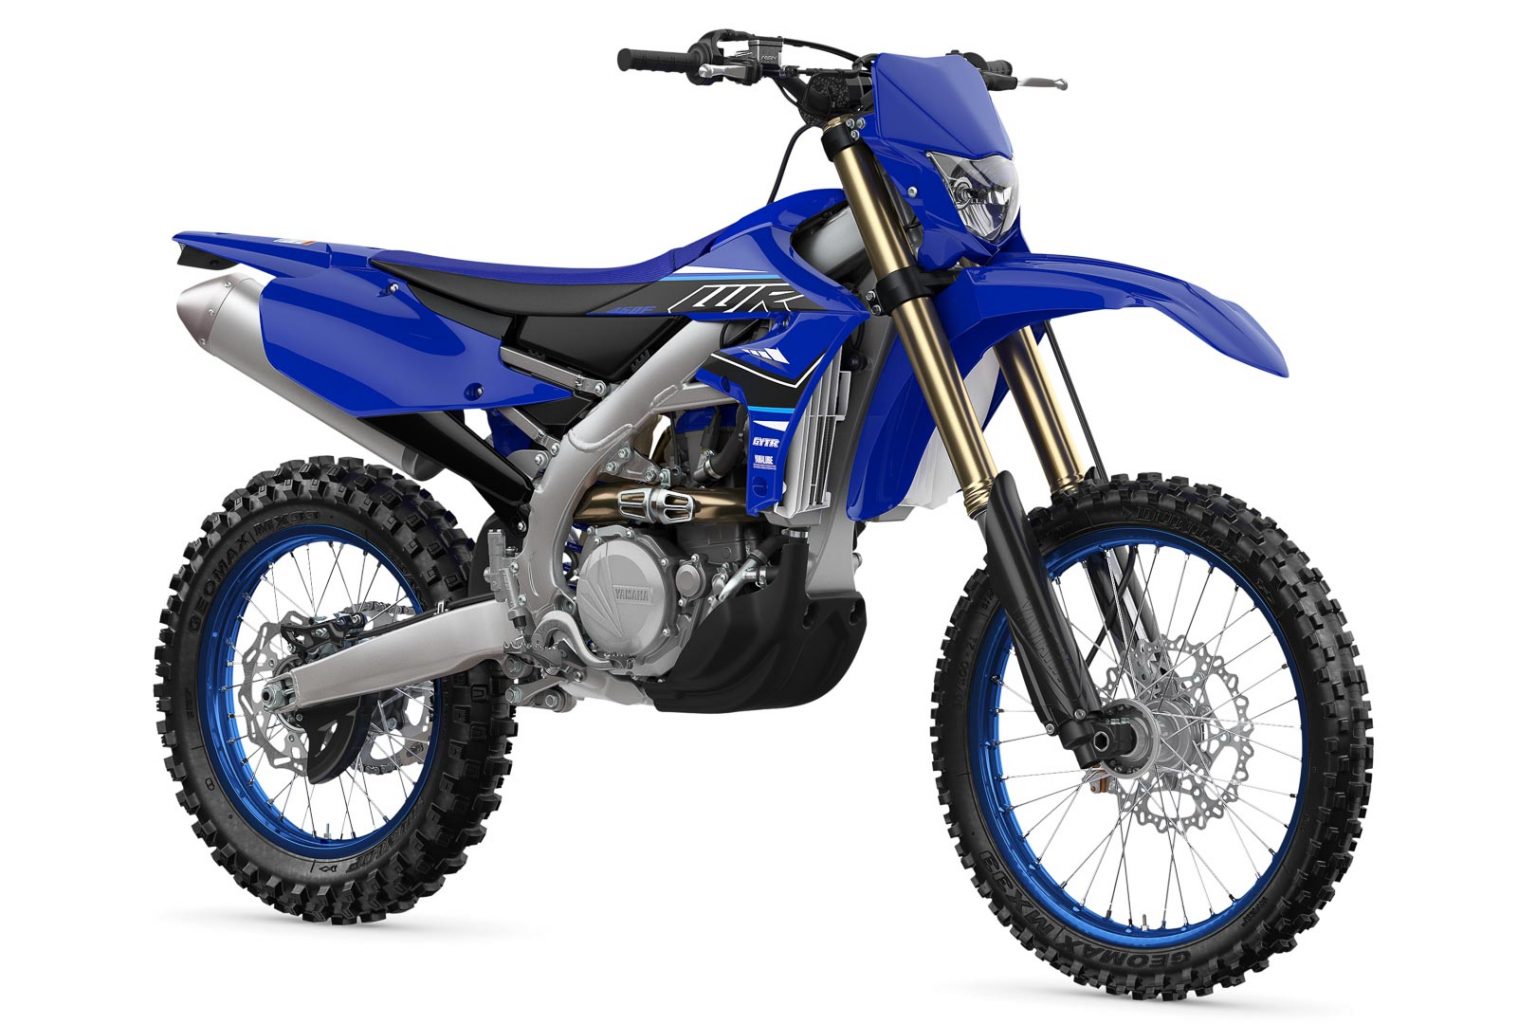 2021 YAMAHA WR450F FIRST LOOK (11 FAST FACTS + PHOTOS AND SPECS